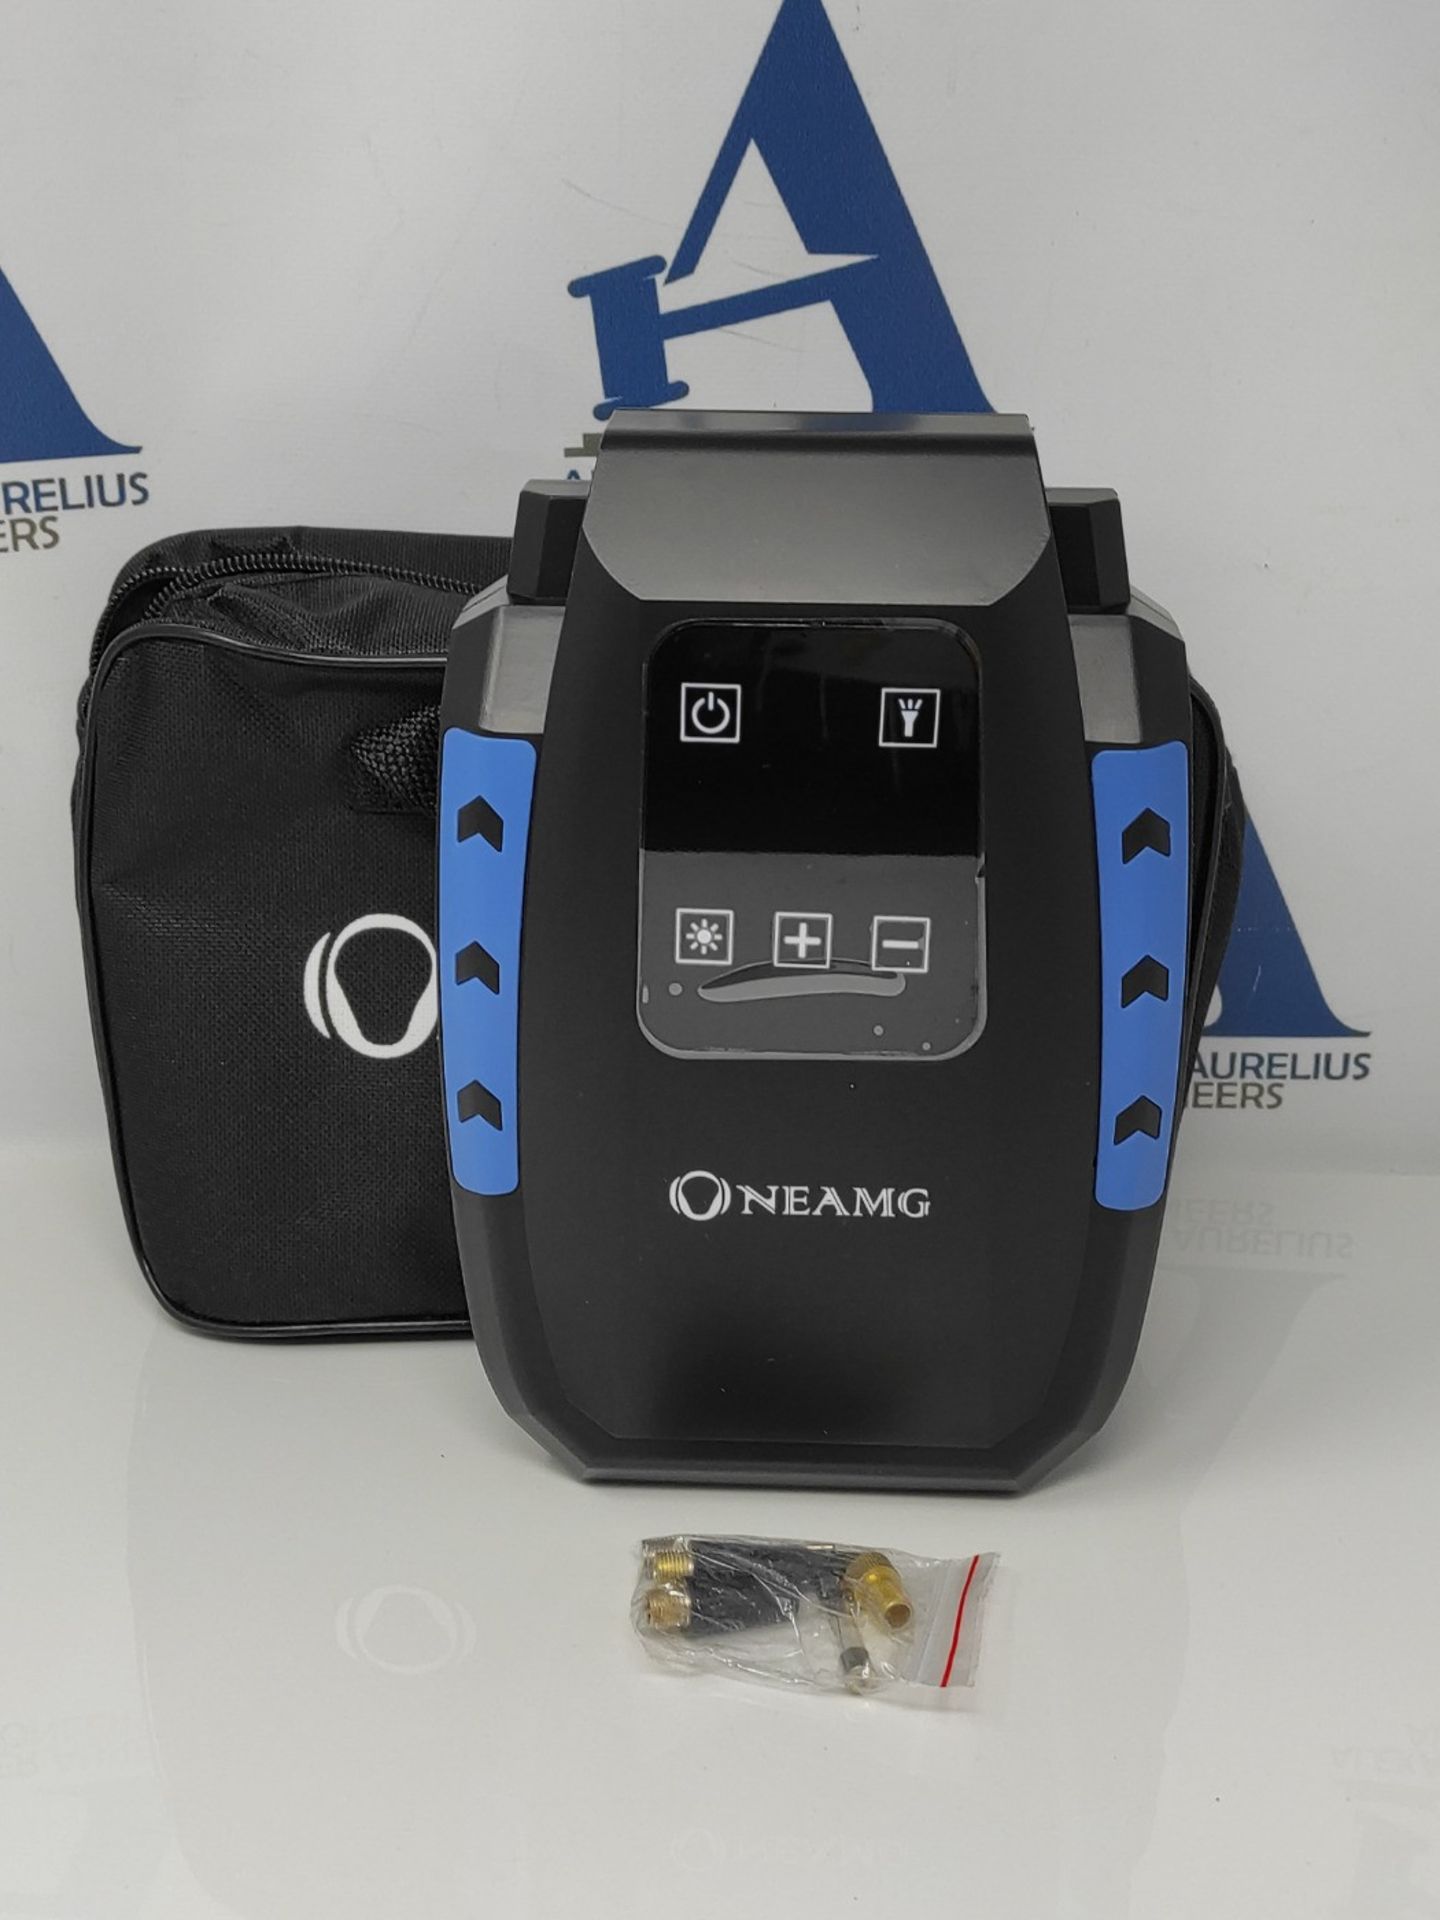 OneAmg Digital Tyre Inflator Air Compressor Updated Touch Screen Car Pump 12V 150PSI A - Image 2 of 2